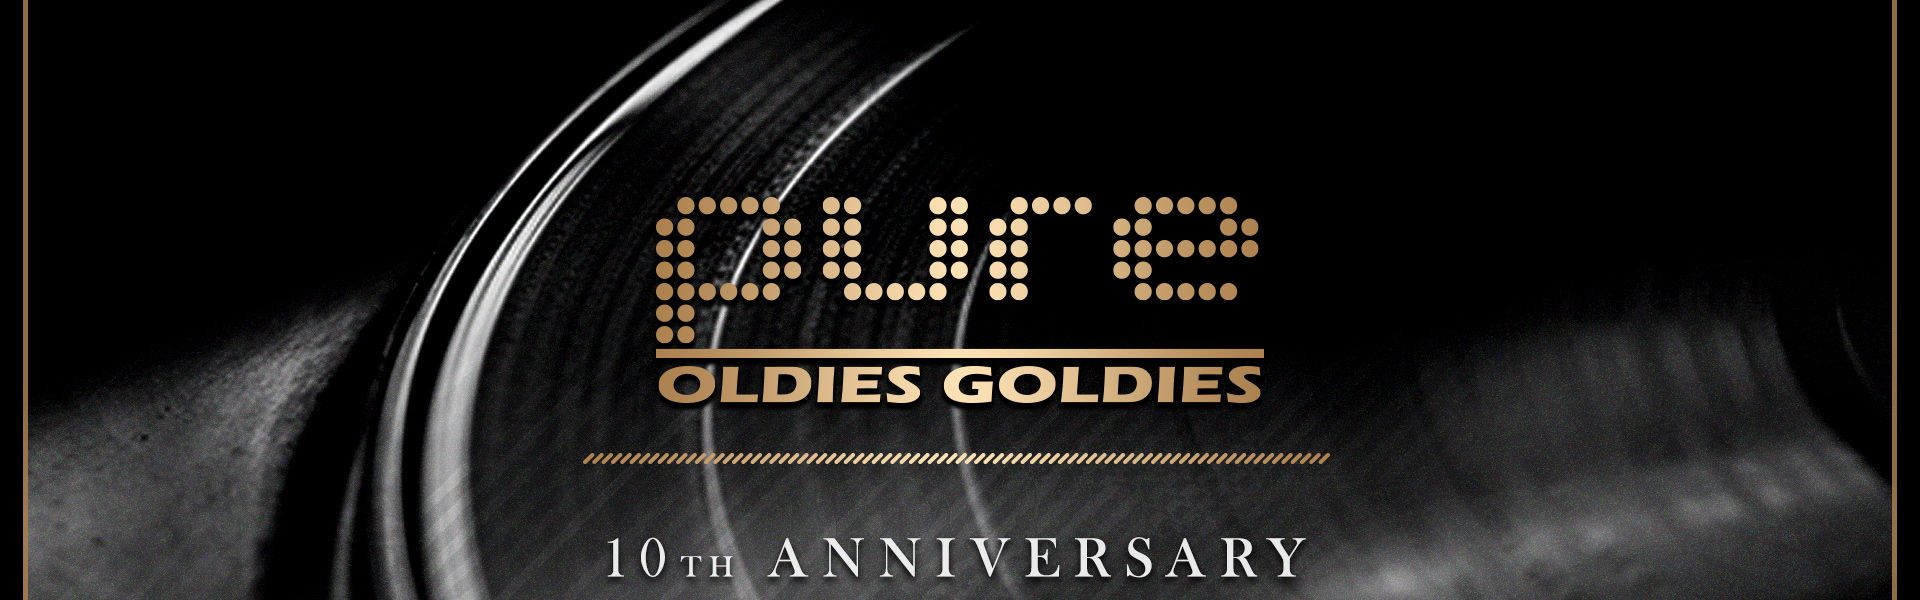 PURE Oldies Goldies 10th ANNIVERSARY